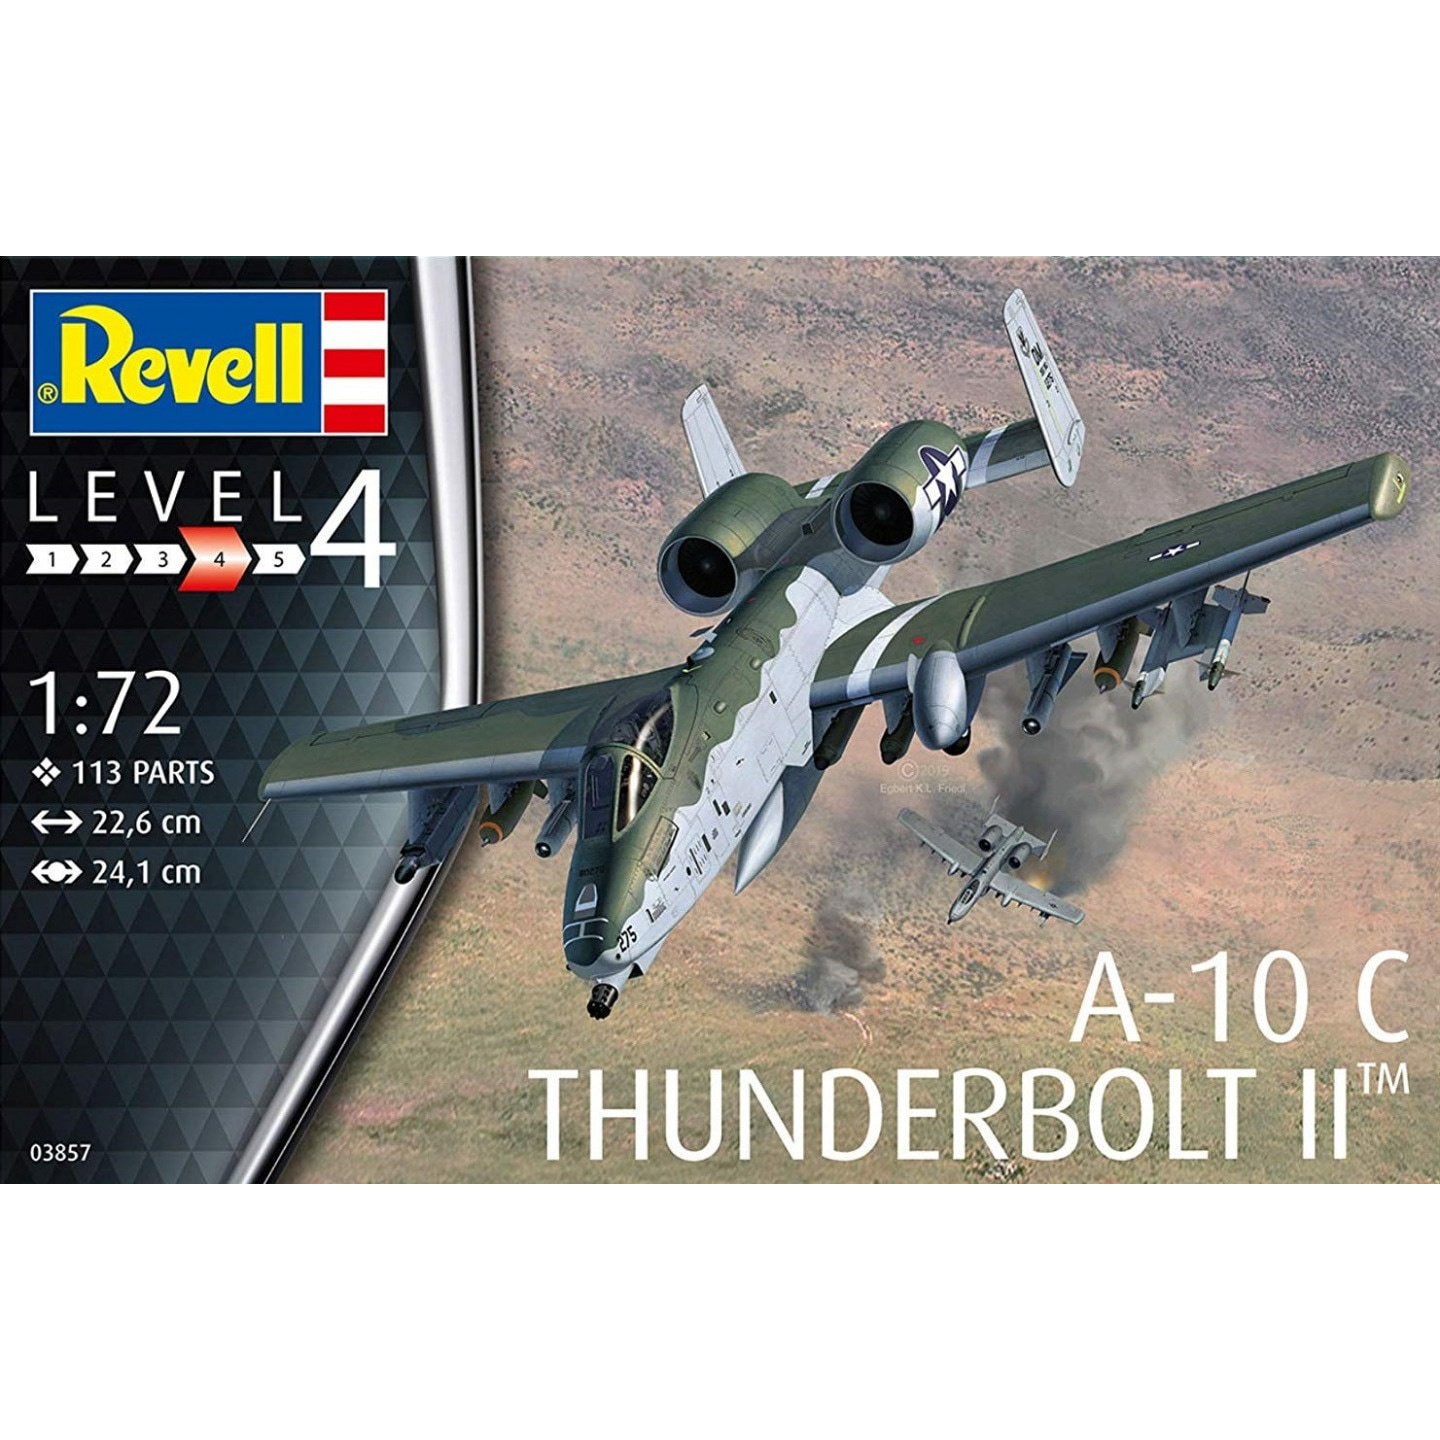 A-10 C Thunderbolt II 1/72 by Revell